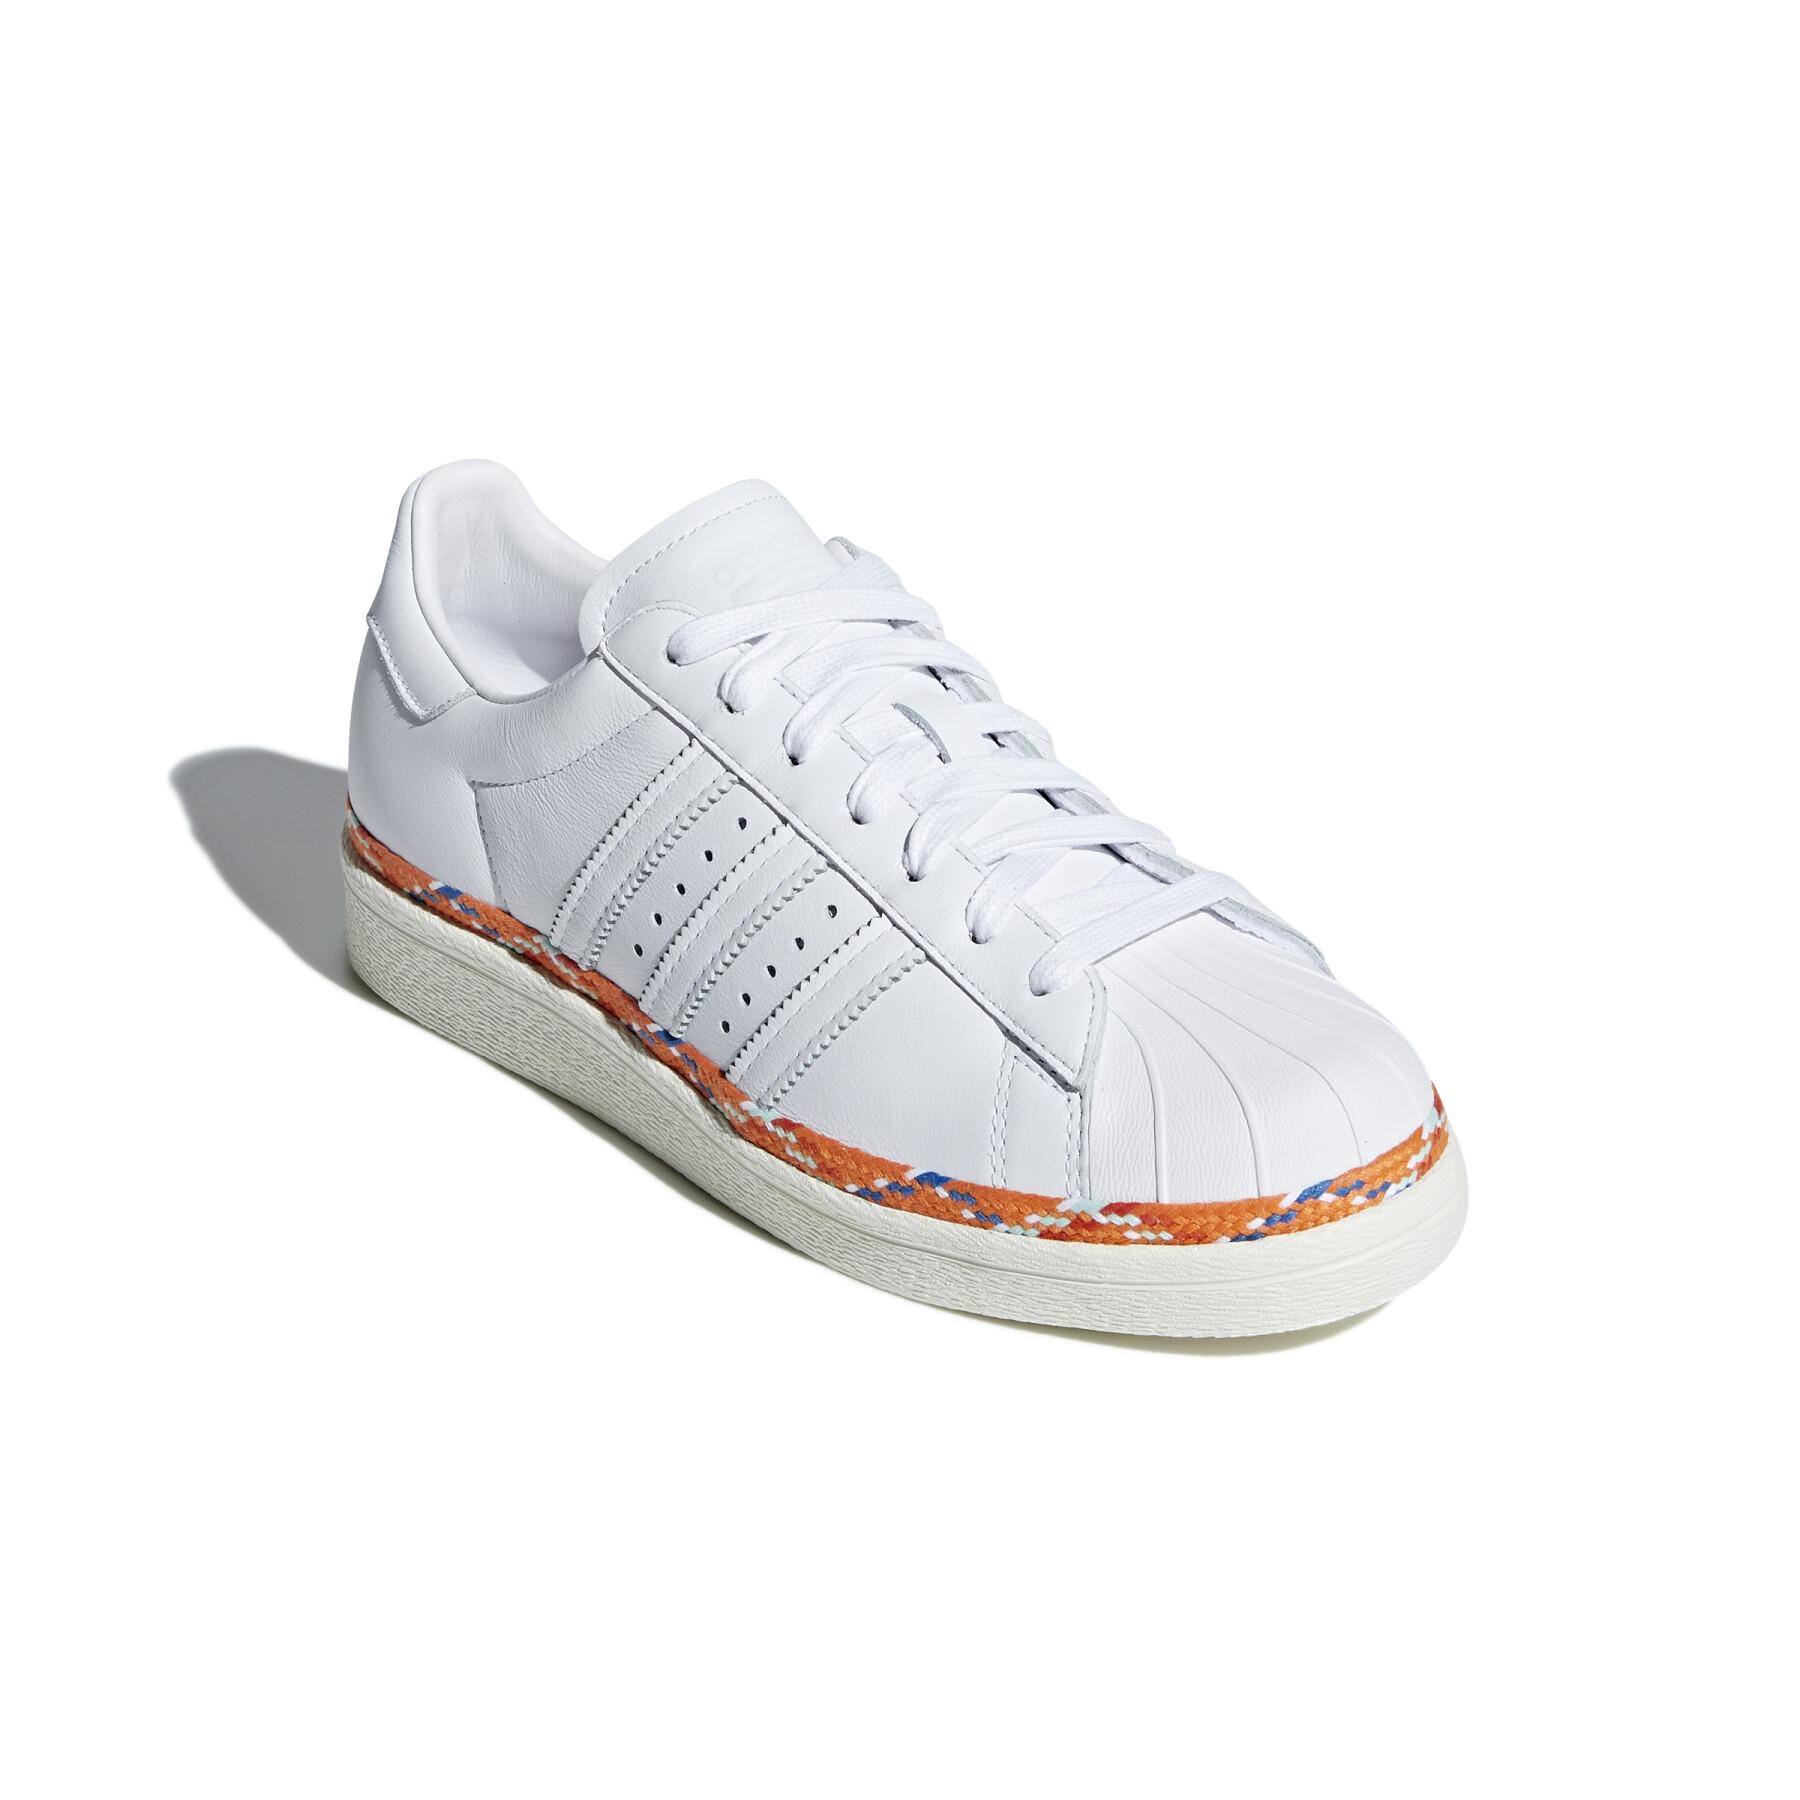 Women's sneakers adidas Superstar 80s New Bold